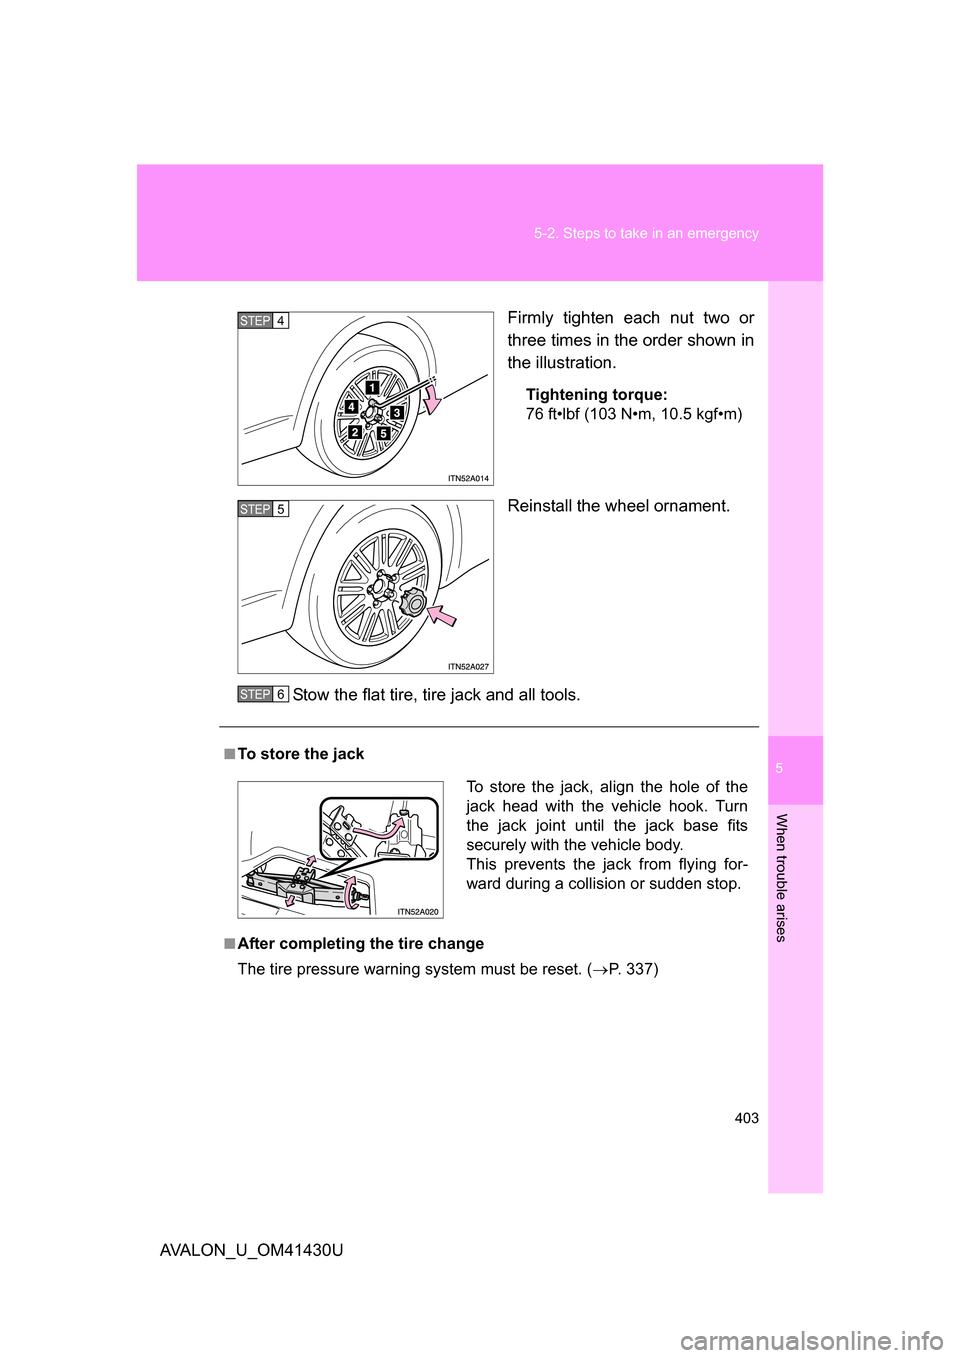 TOYOTA AVALON 2009 XX30 / 3.G Owners Guide 5
When trouble arises
403
5-2. Steps to take in an emergency
AVALON_U_OM41430U
Firmly tighten each nut two or
three times in the order shown in
the illustration.
Tightening torque:
76 ft•lbf (103 N�